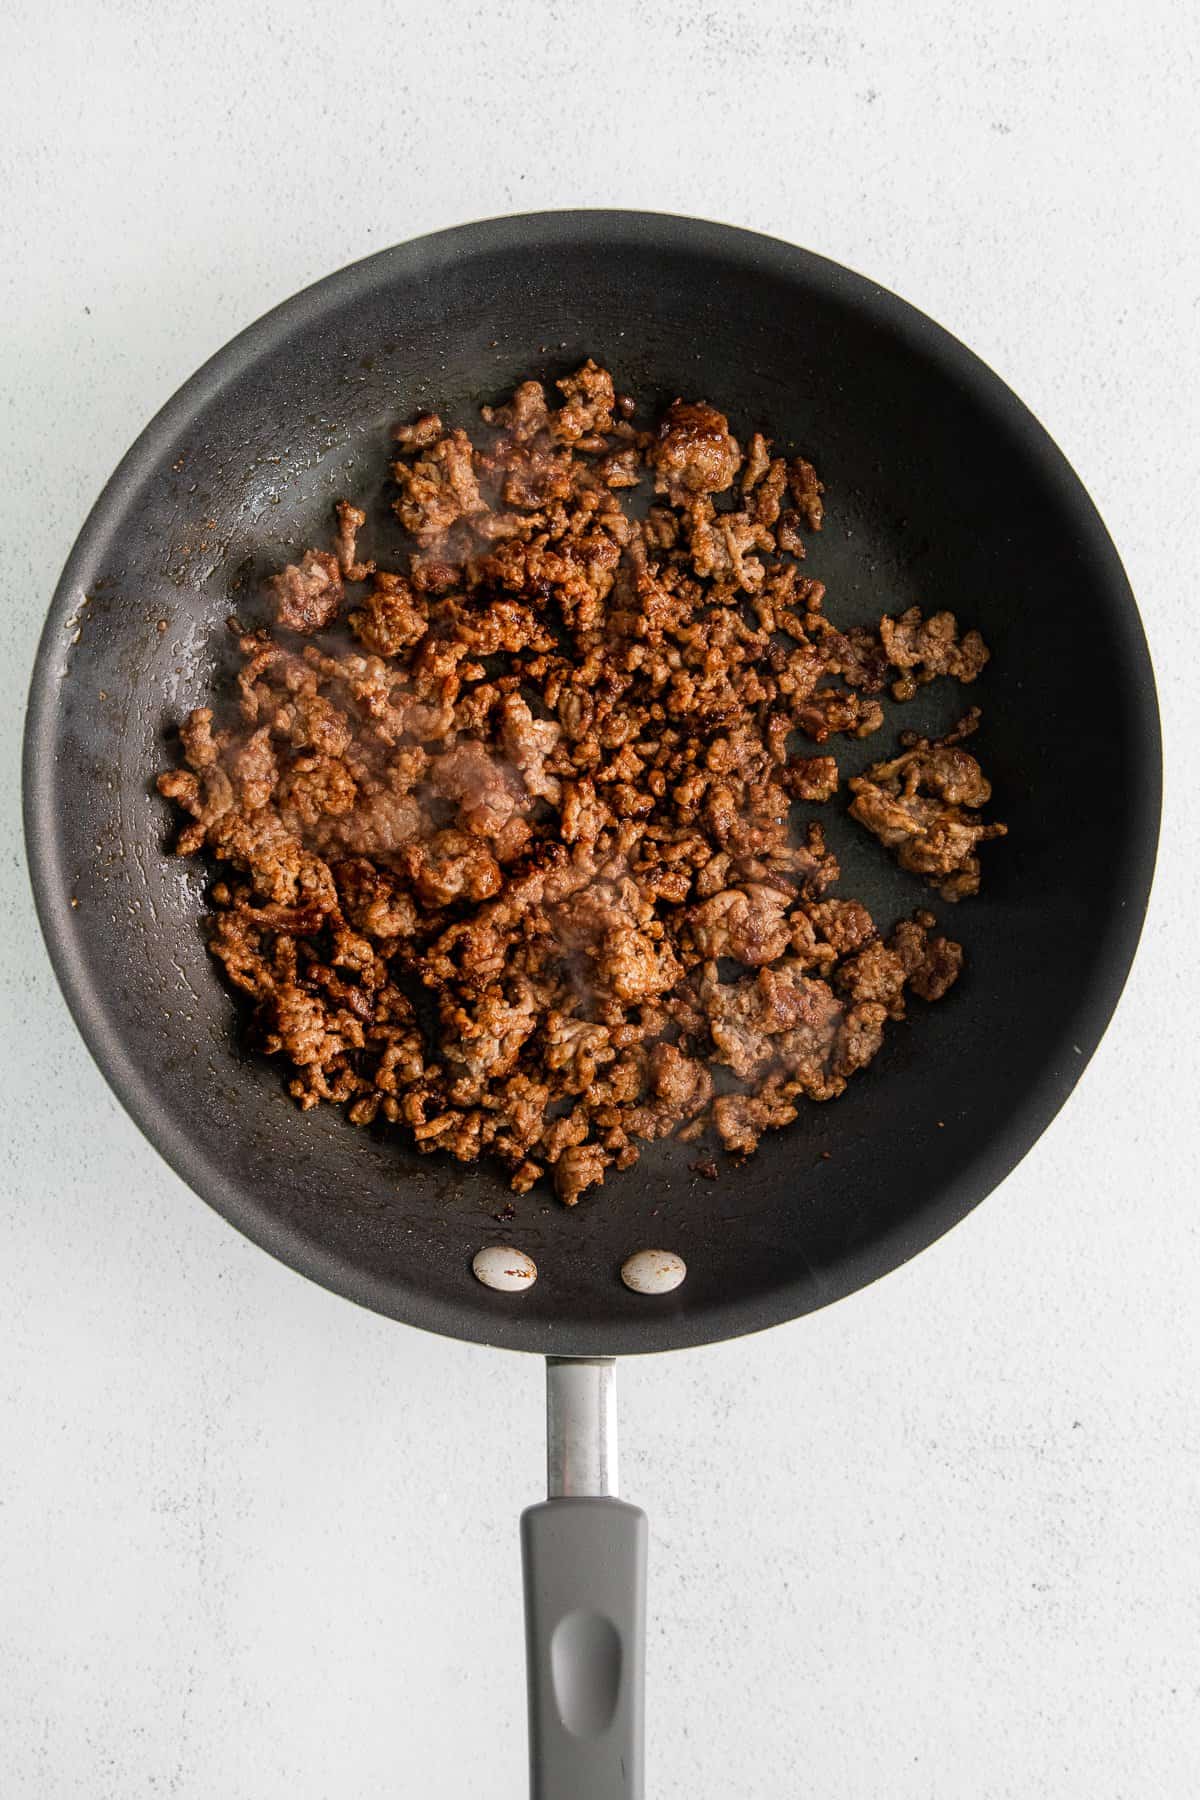 Ground beef in a skillet.